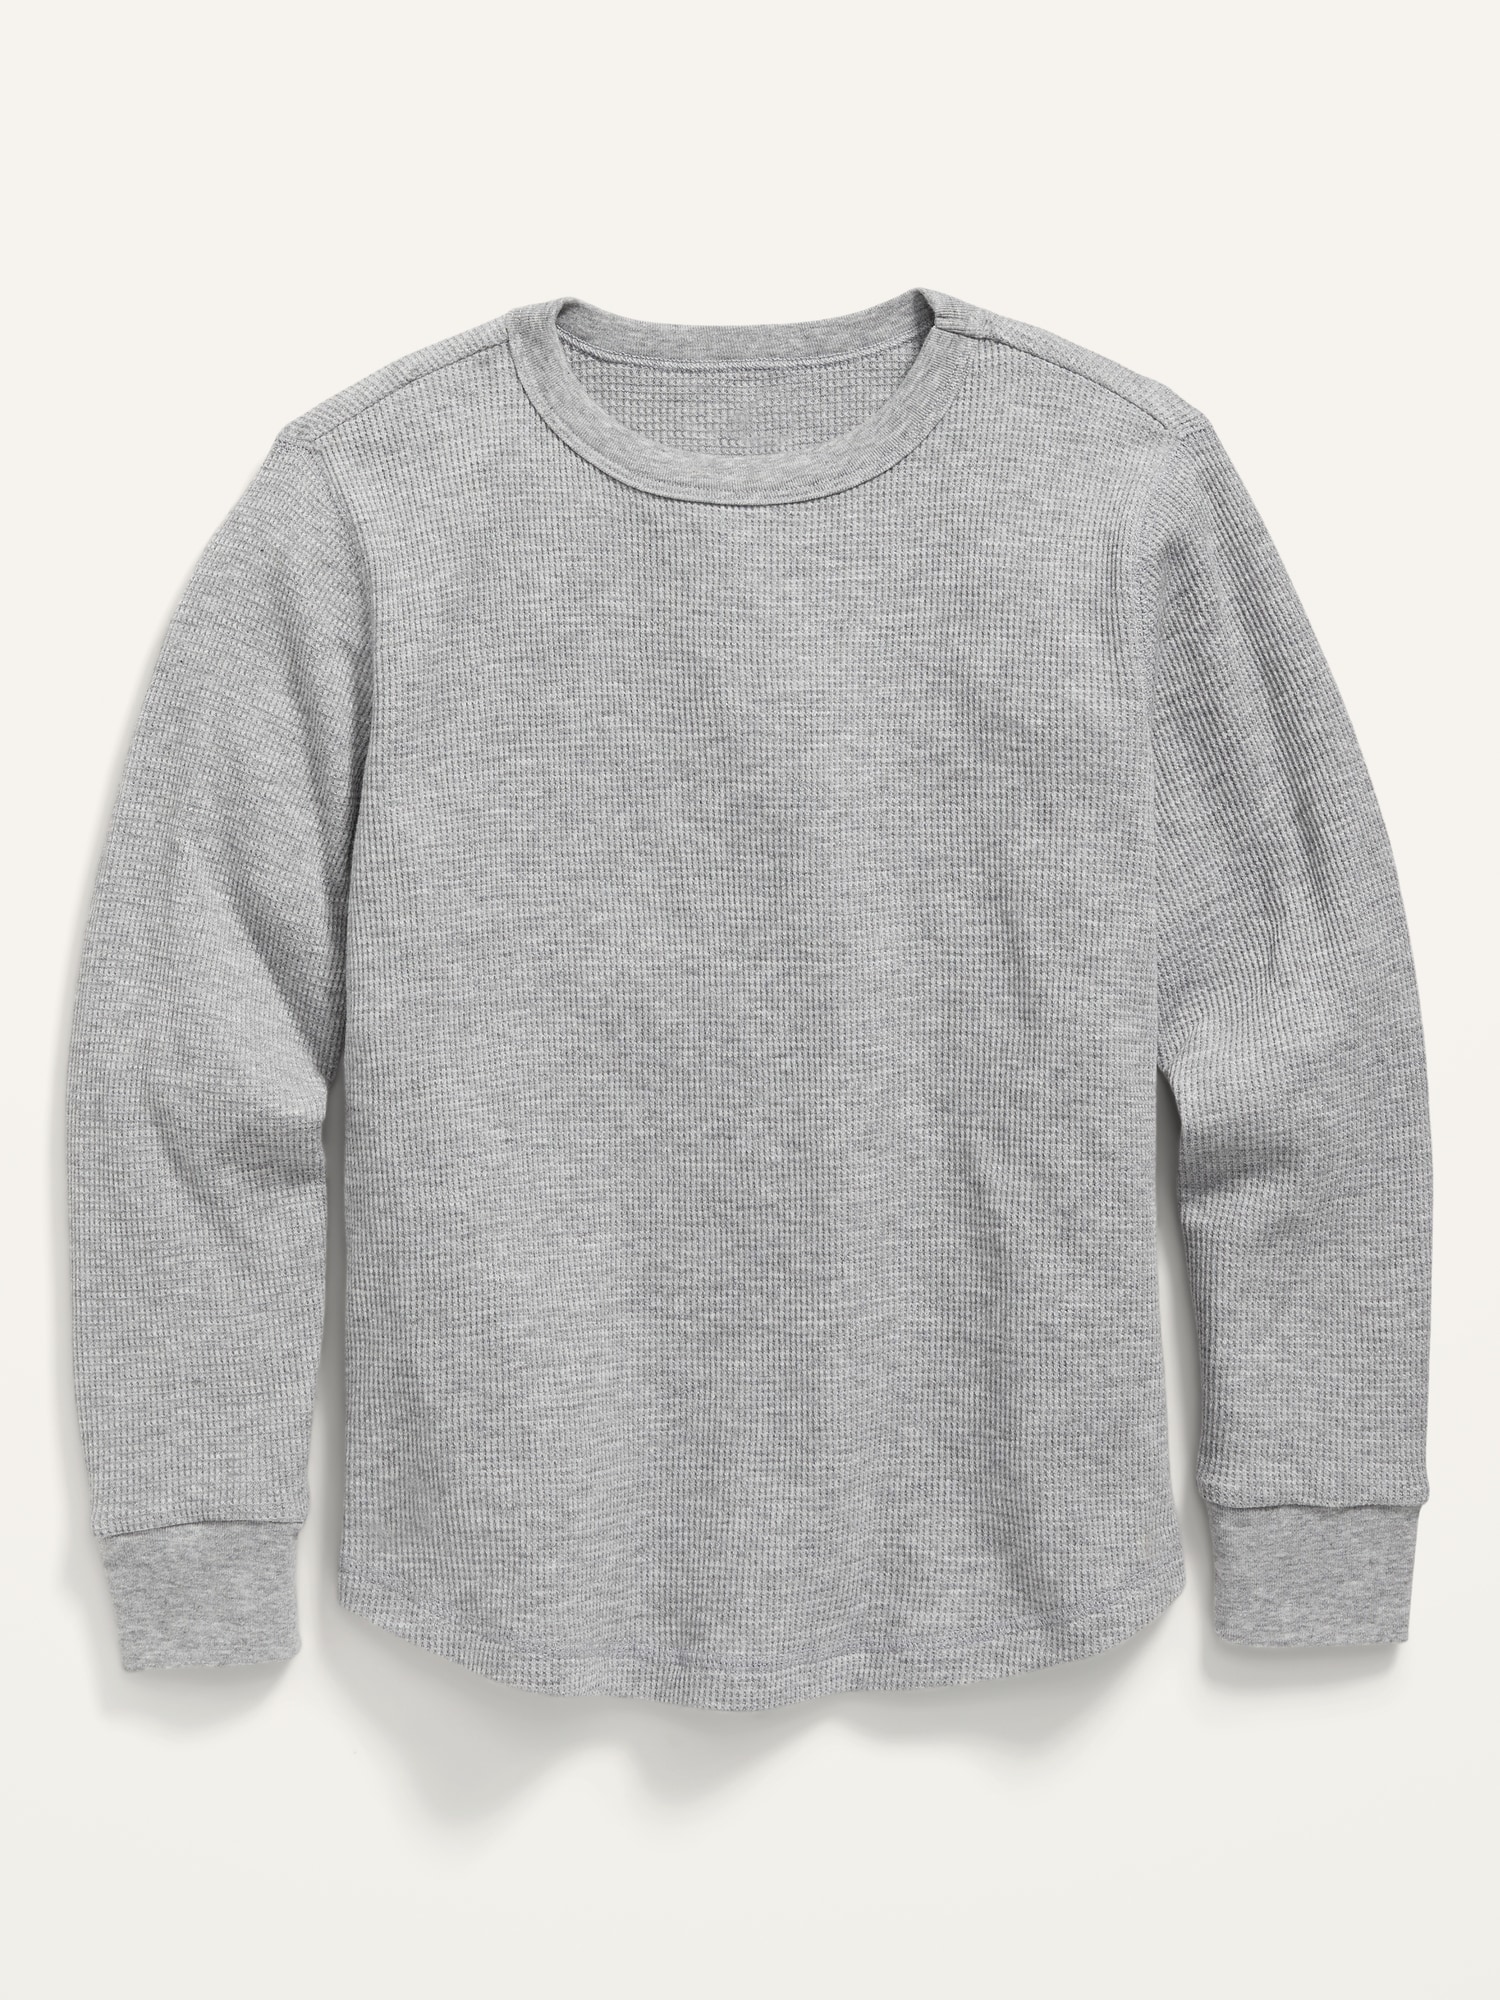 Thermal-Knit Long-Sleeve T-Shirt for Boys | Old Navy